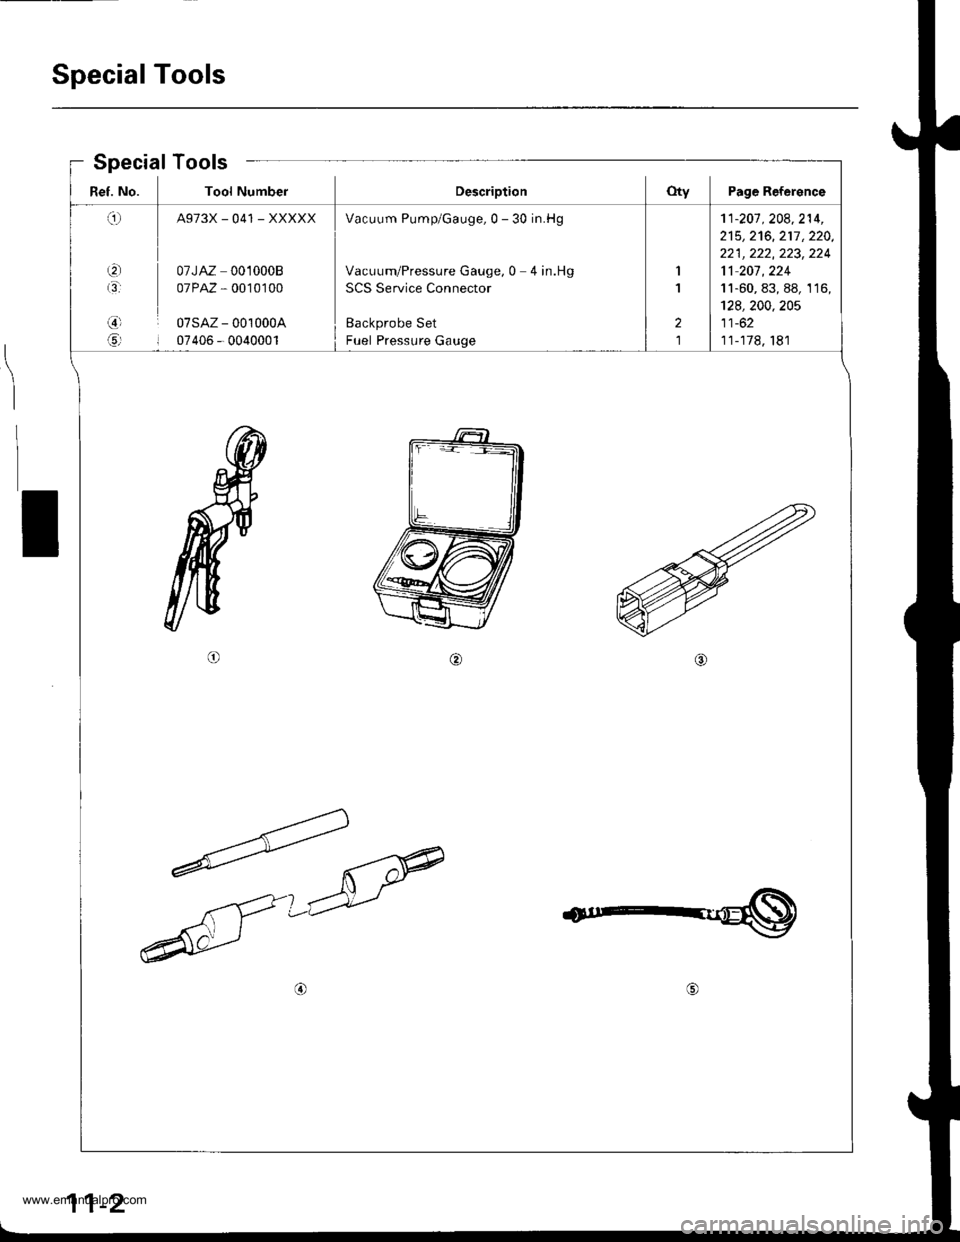 HONDA CR-V 1998 RD1-RD3 / 1.G User Guide 
Special Tools
Ref. No. Tool NumberDescriptionOty Page Reference
q
t3
,3)l
6rl
A973X_041 _XXXXX
07JAZ 0010008
07PAZ , 0010100
07sAz - 001000A
07405 - 0040001
Vacuum Pump/Gauge,0 - 30 in.Hg
Vacuum/Pre